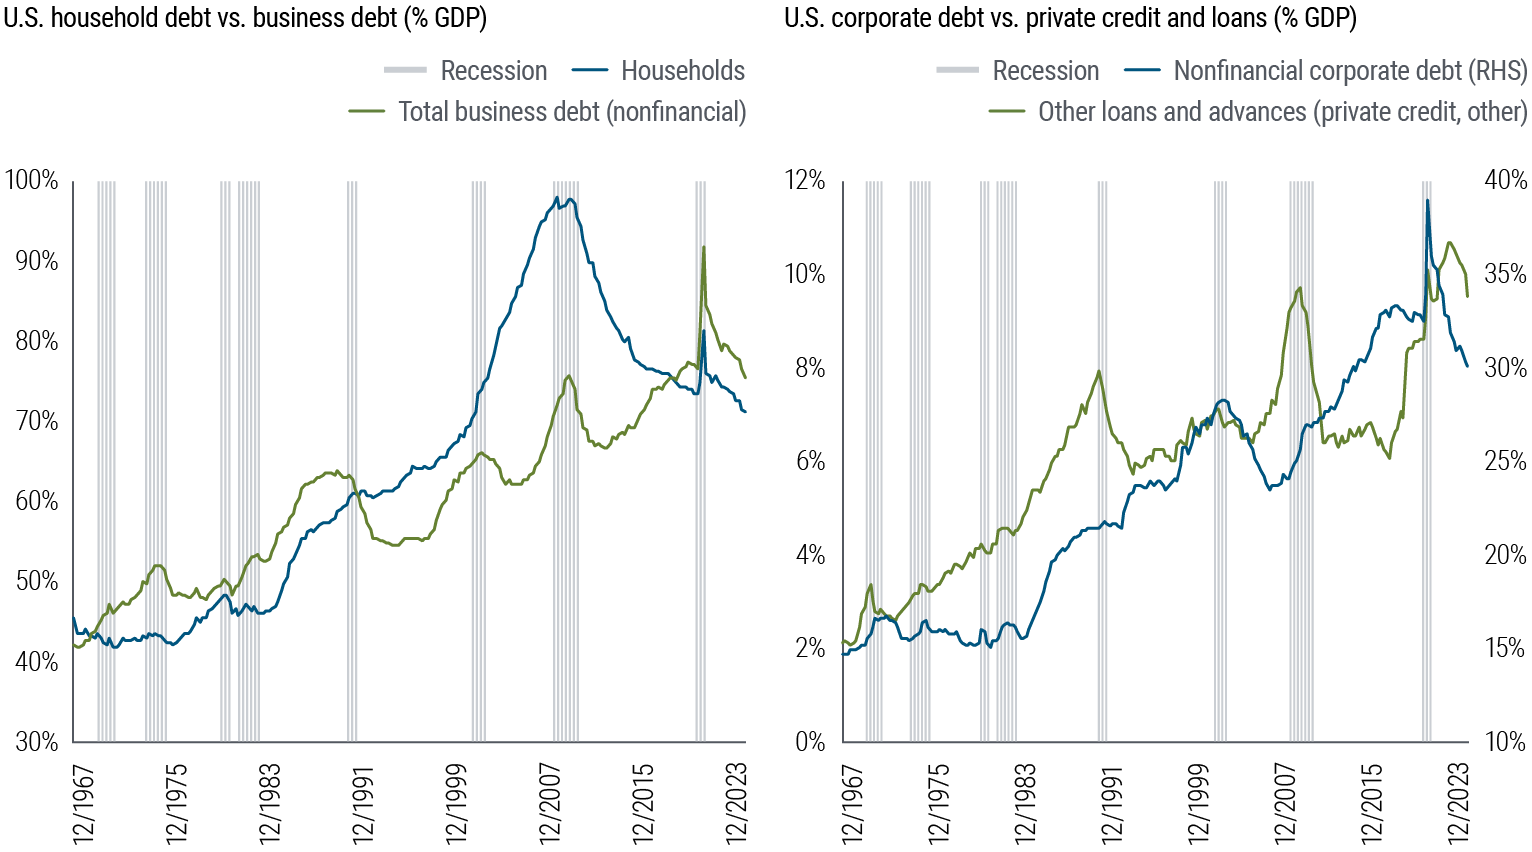 Figure 4 includes two line charts showing data from December 1967 through December 2023. The first chart shows two measures of debt – U.S. households and U.S. businesses (nonfinancial) – as a percentage of U.S. GDP. In that time frame, the household debt ratio peaked in 2008 and 2009 at 97%, then dropped to 74% in 2019, spiked briefly amid the pandemic to 82% in 2020, and has since fallen to 71%. The business debt ratio peaked amid the pandemic at 92% and has since fallen to 76%. The second chart shows two other measures – U.S. private credit and bank loans (proxied by the other loans and advances category in the Federal Reserve Flow of Funds data) and nonfinancial corporate debt – as a percentage of U.S. GDP. In the same time frame, private credit peaked at 10% in 2022, and now stands at 9%. Nonfinancial corporate debt peaked at 38% in 2020, and now stands at 30%. In both charts, periods of U.S. recession are indicated by shaded areas. Source: Federal Reserve Flow of Funds data, Haver Analytics, PIMCO calculations.